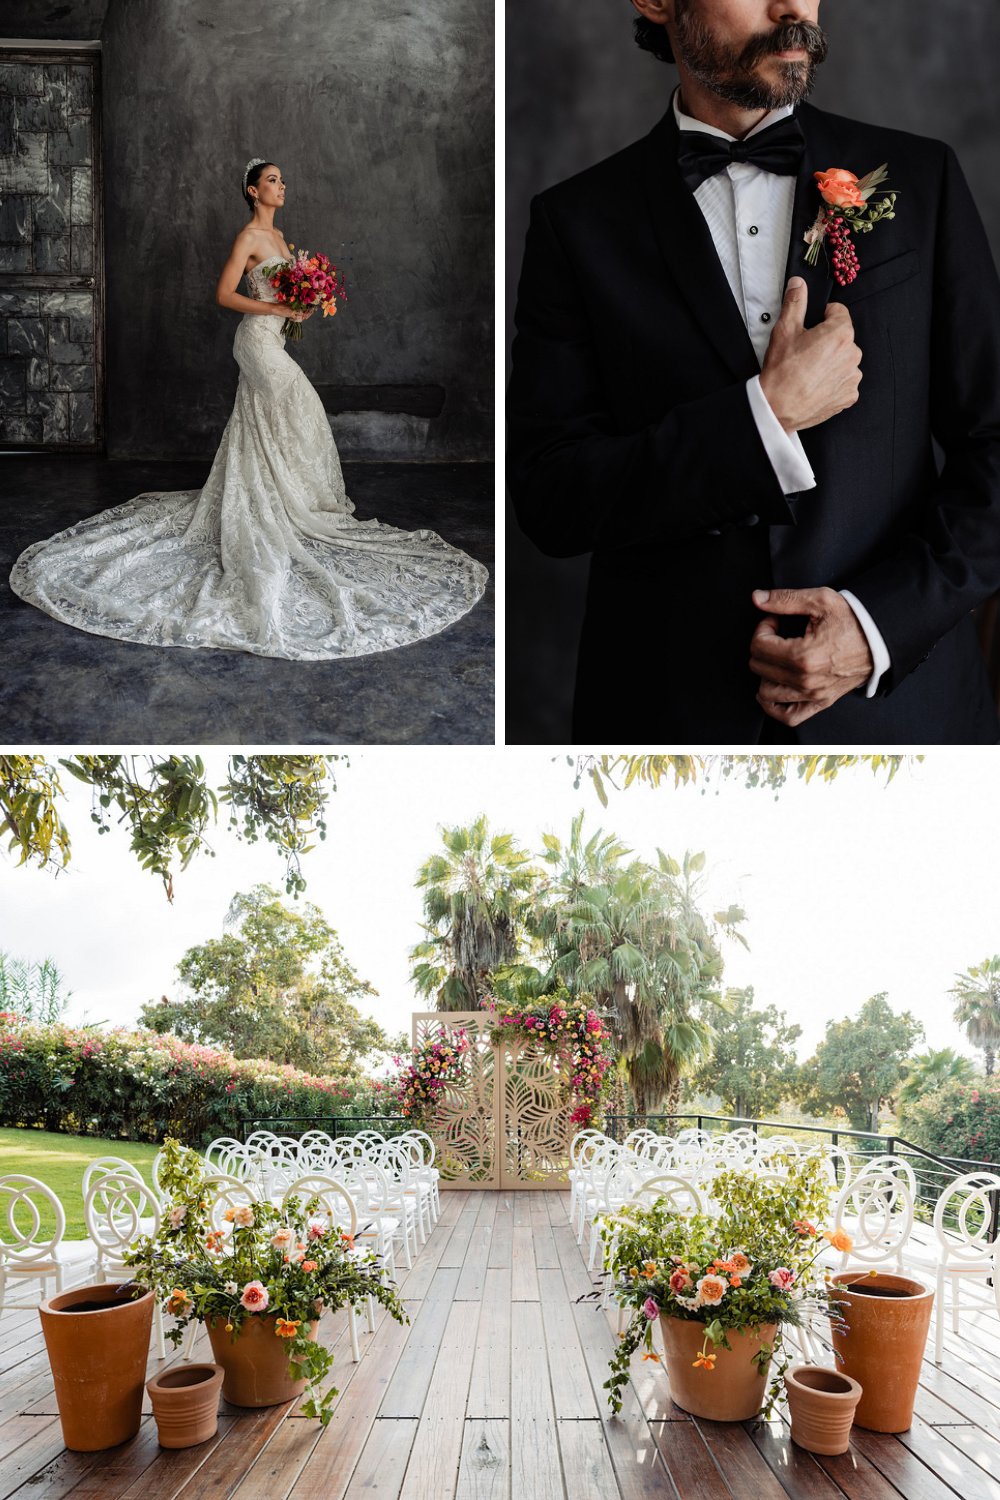 Collage of bride, groom and wedding arch